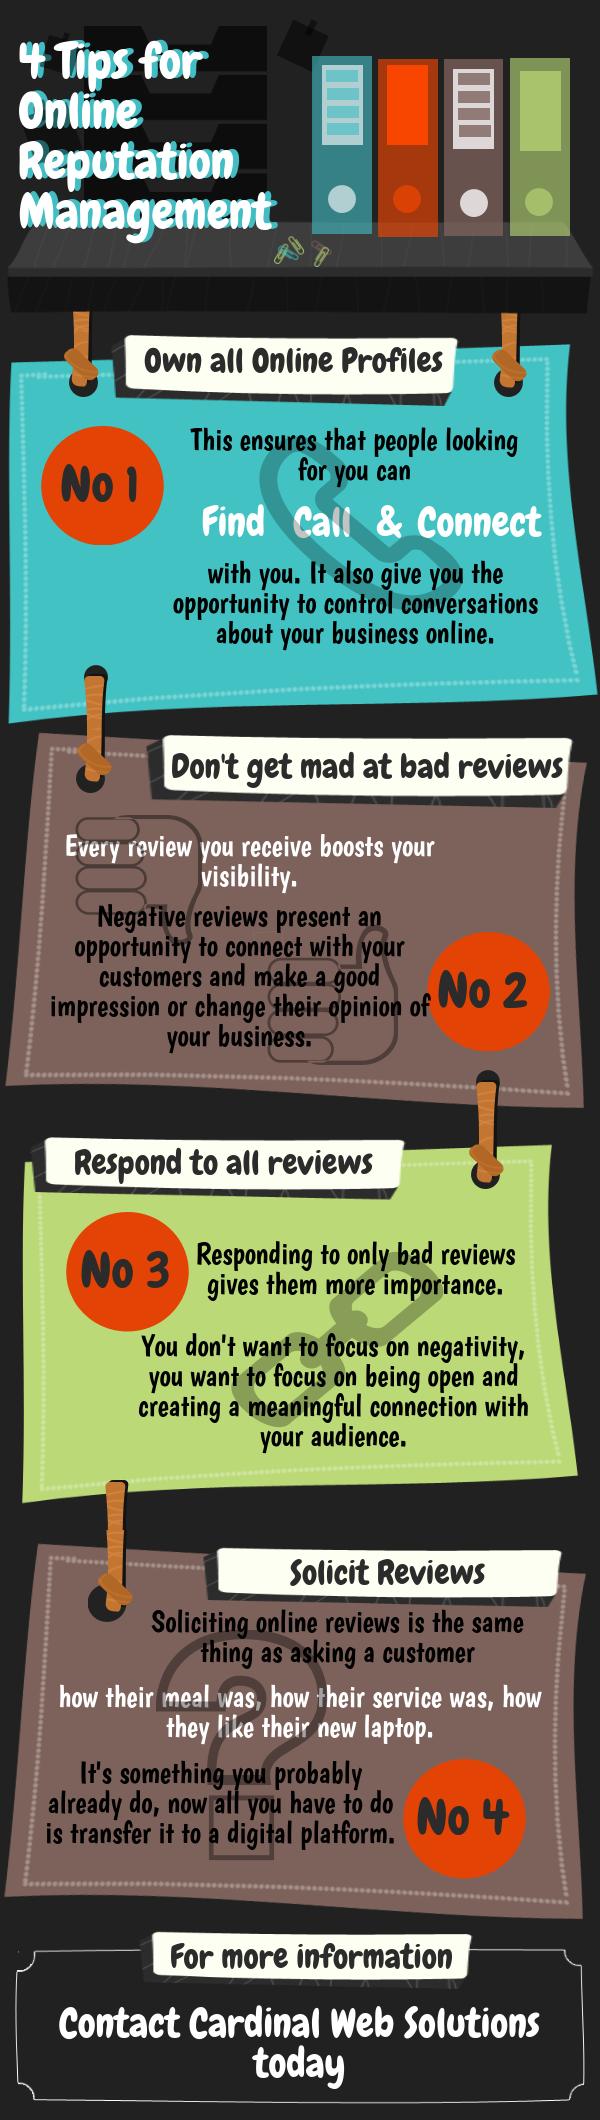 4_tips_for_online_reputation_managment_infographic